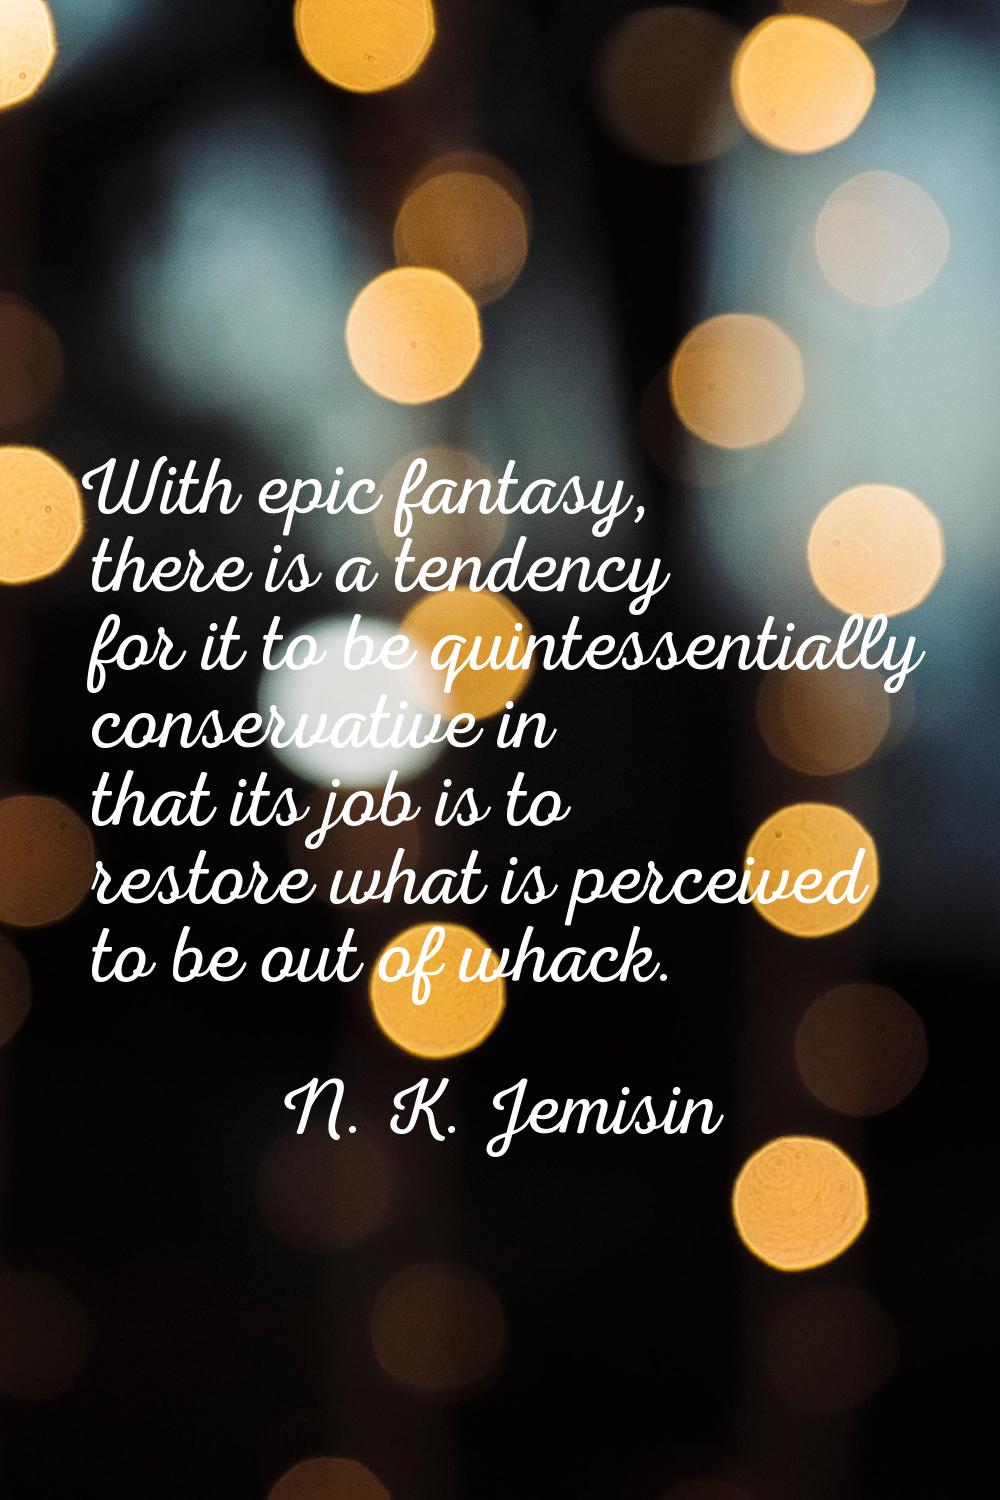 With epic fantasy, there is a tendency for it to be quintessentially conservative in that its job i